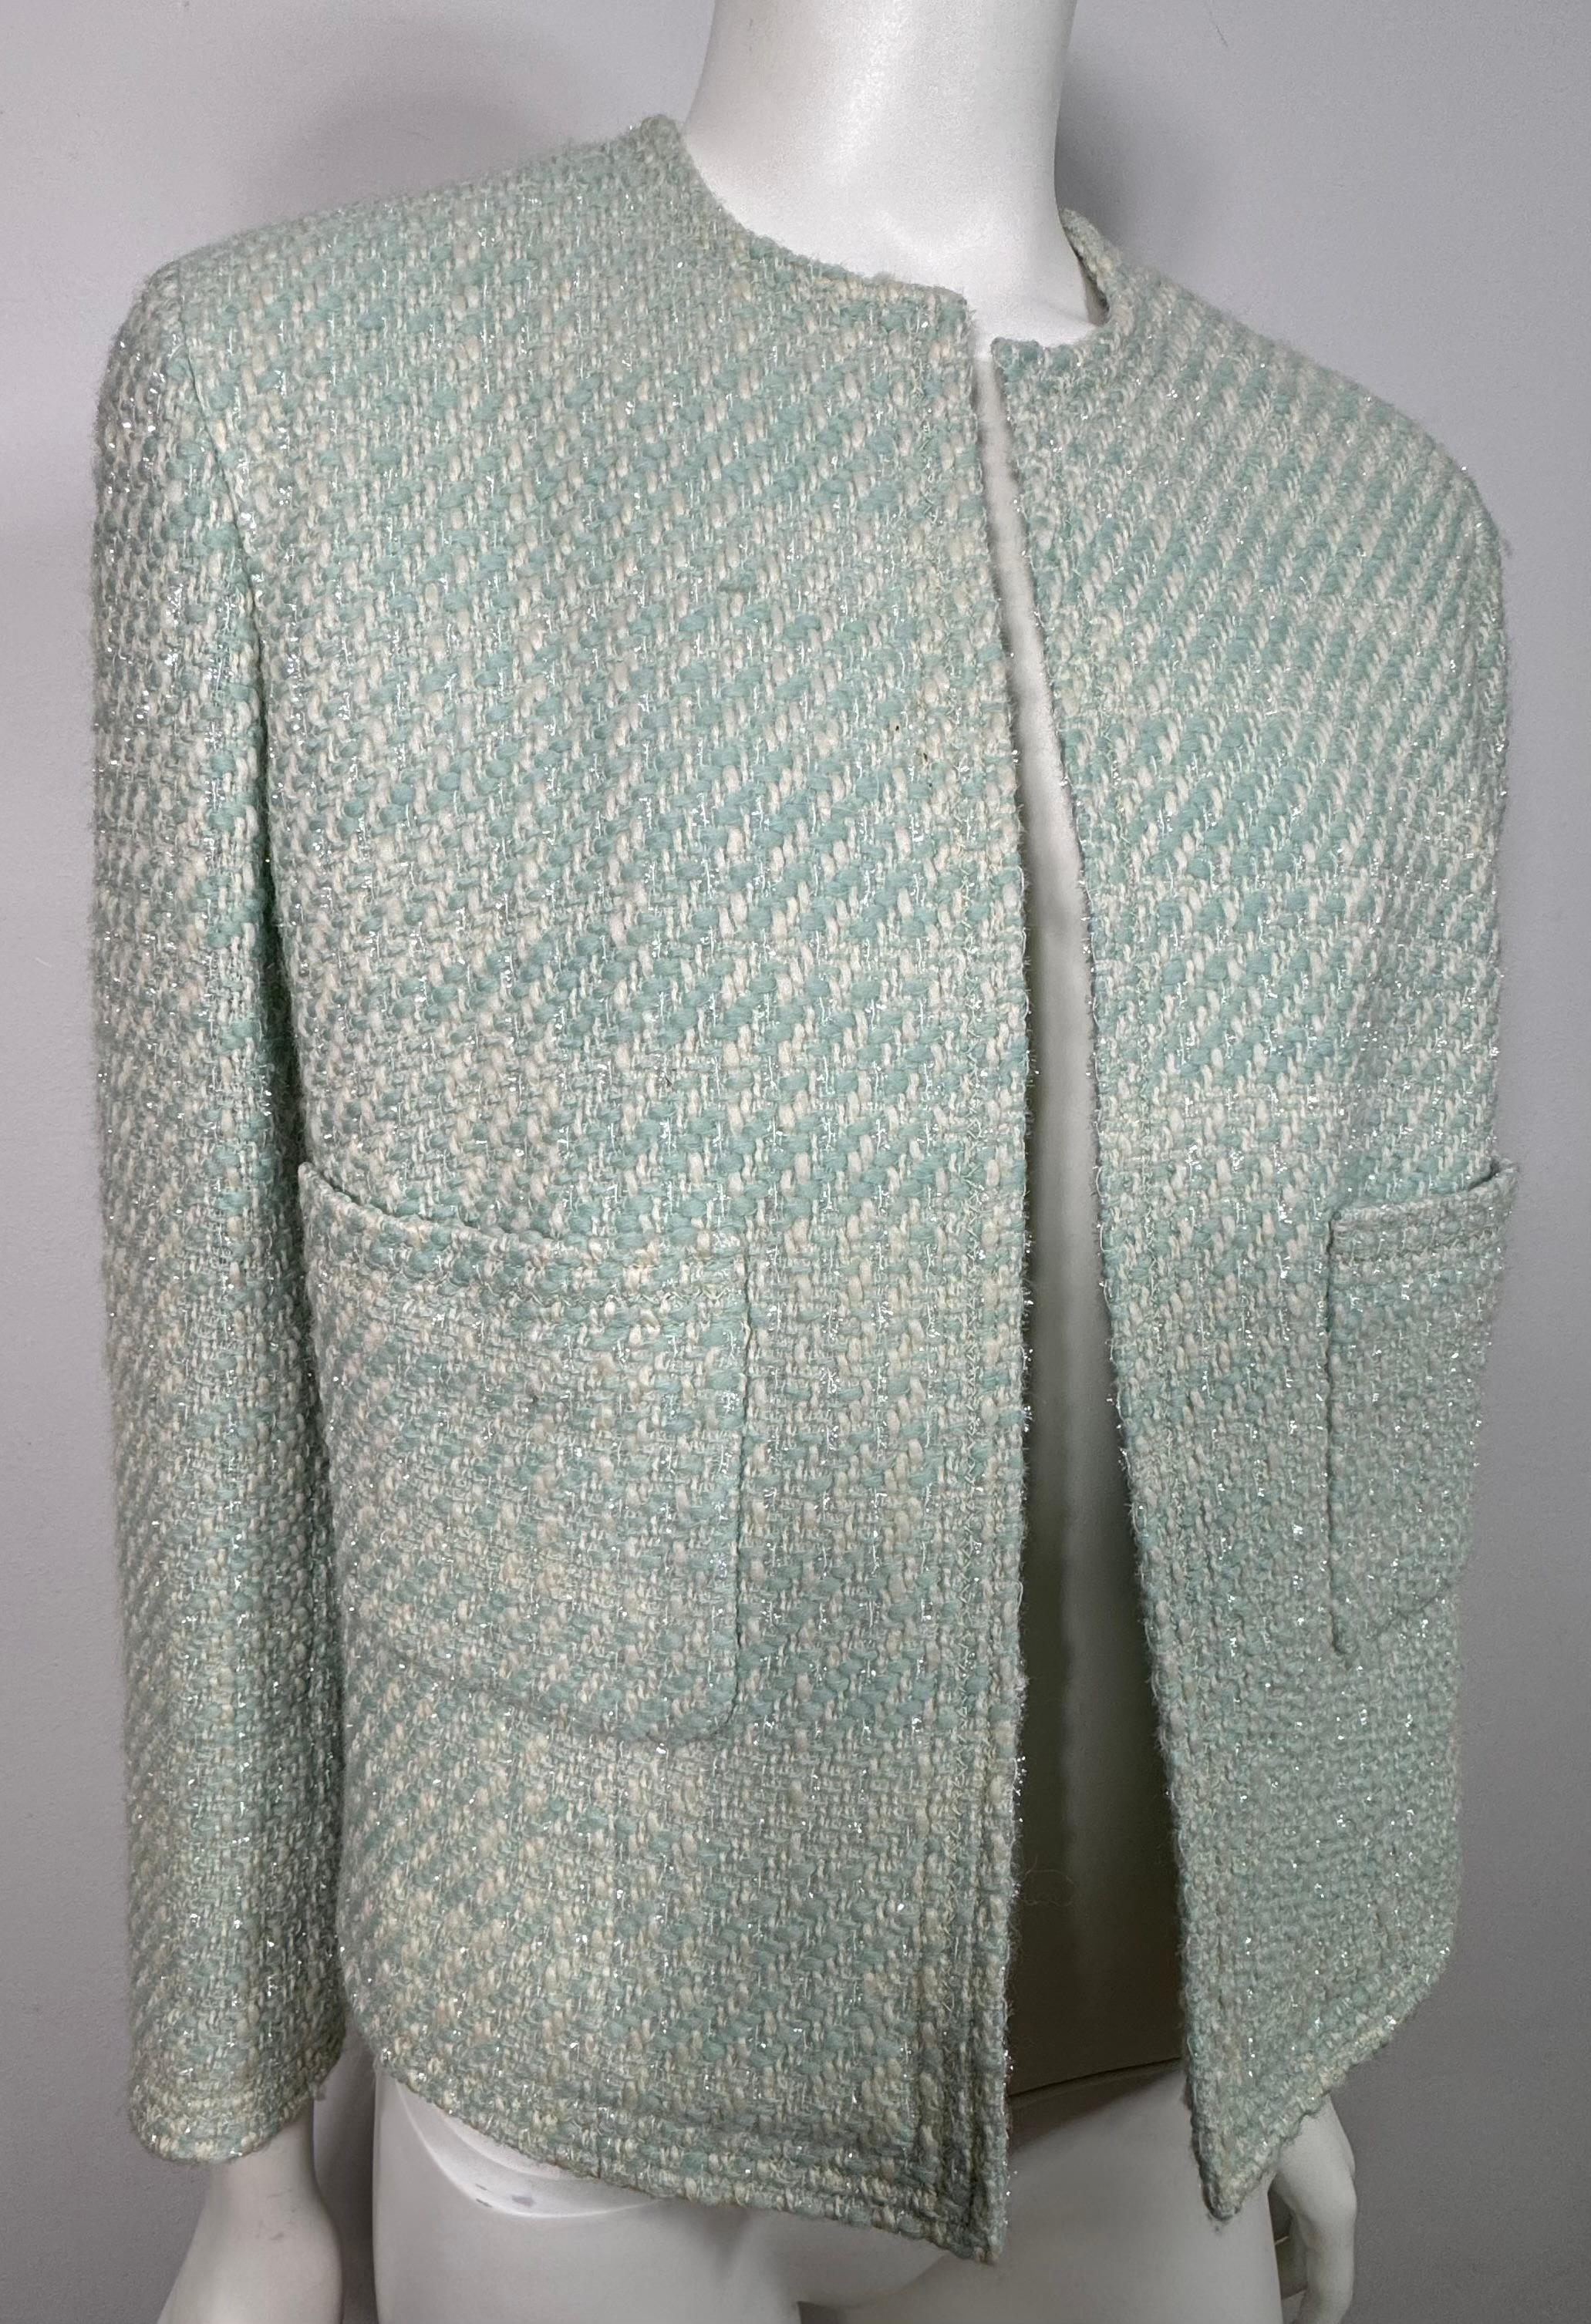 Chanel Boutique Runway Spring 1992 Ivory and Turq Tweed Jacket In Good Condition For Sale In West Palm Beach, FL